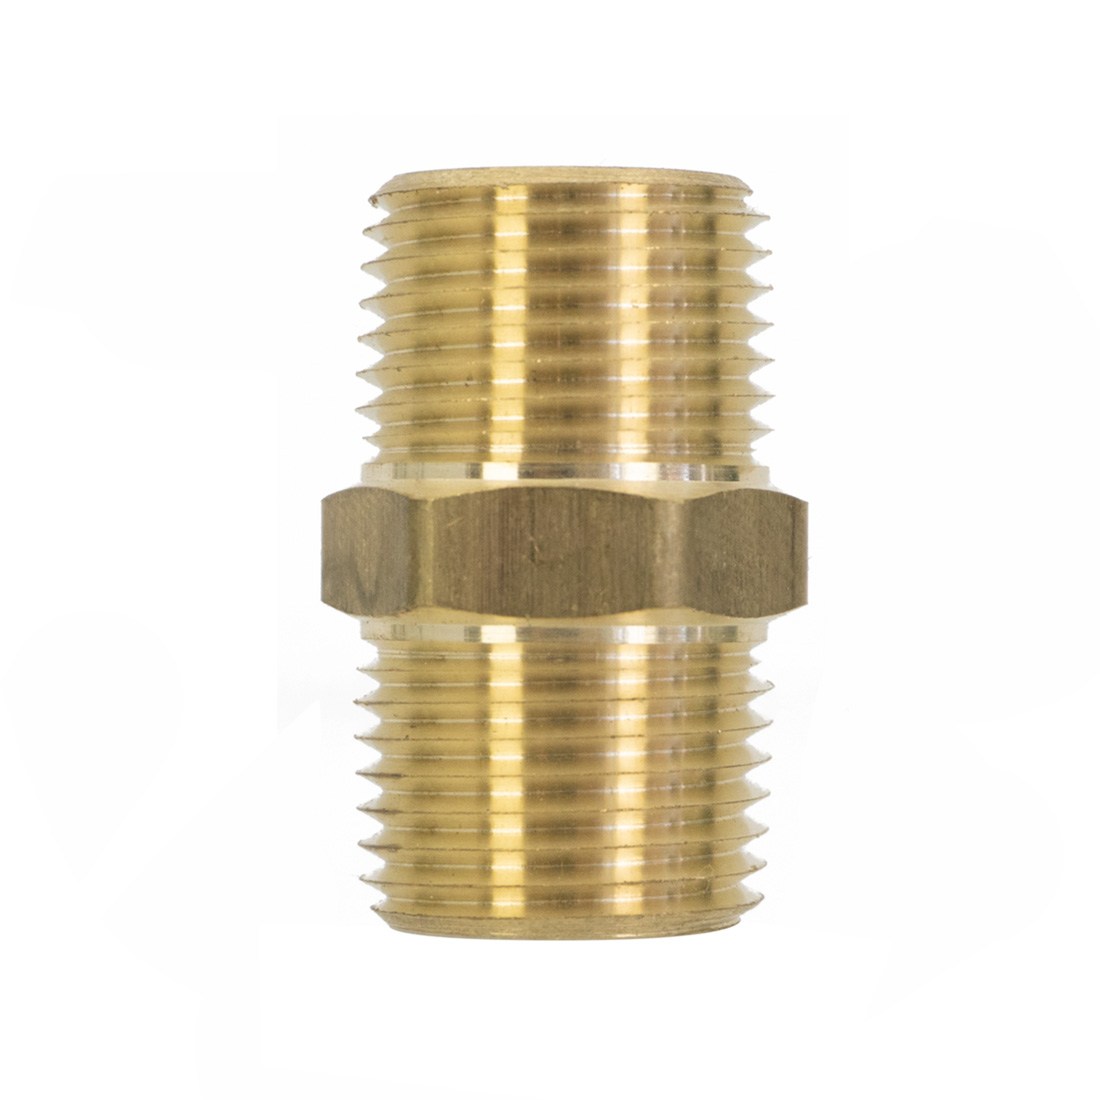 PWP Brass Fitting - Hex Nipple 1/2 NPT Side View